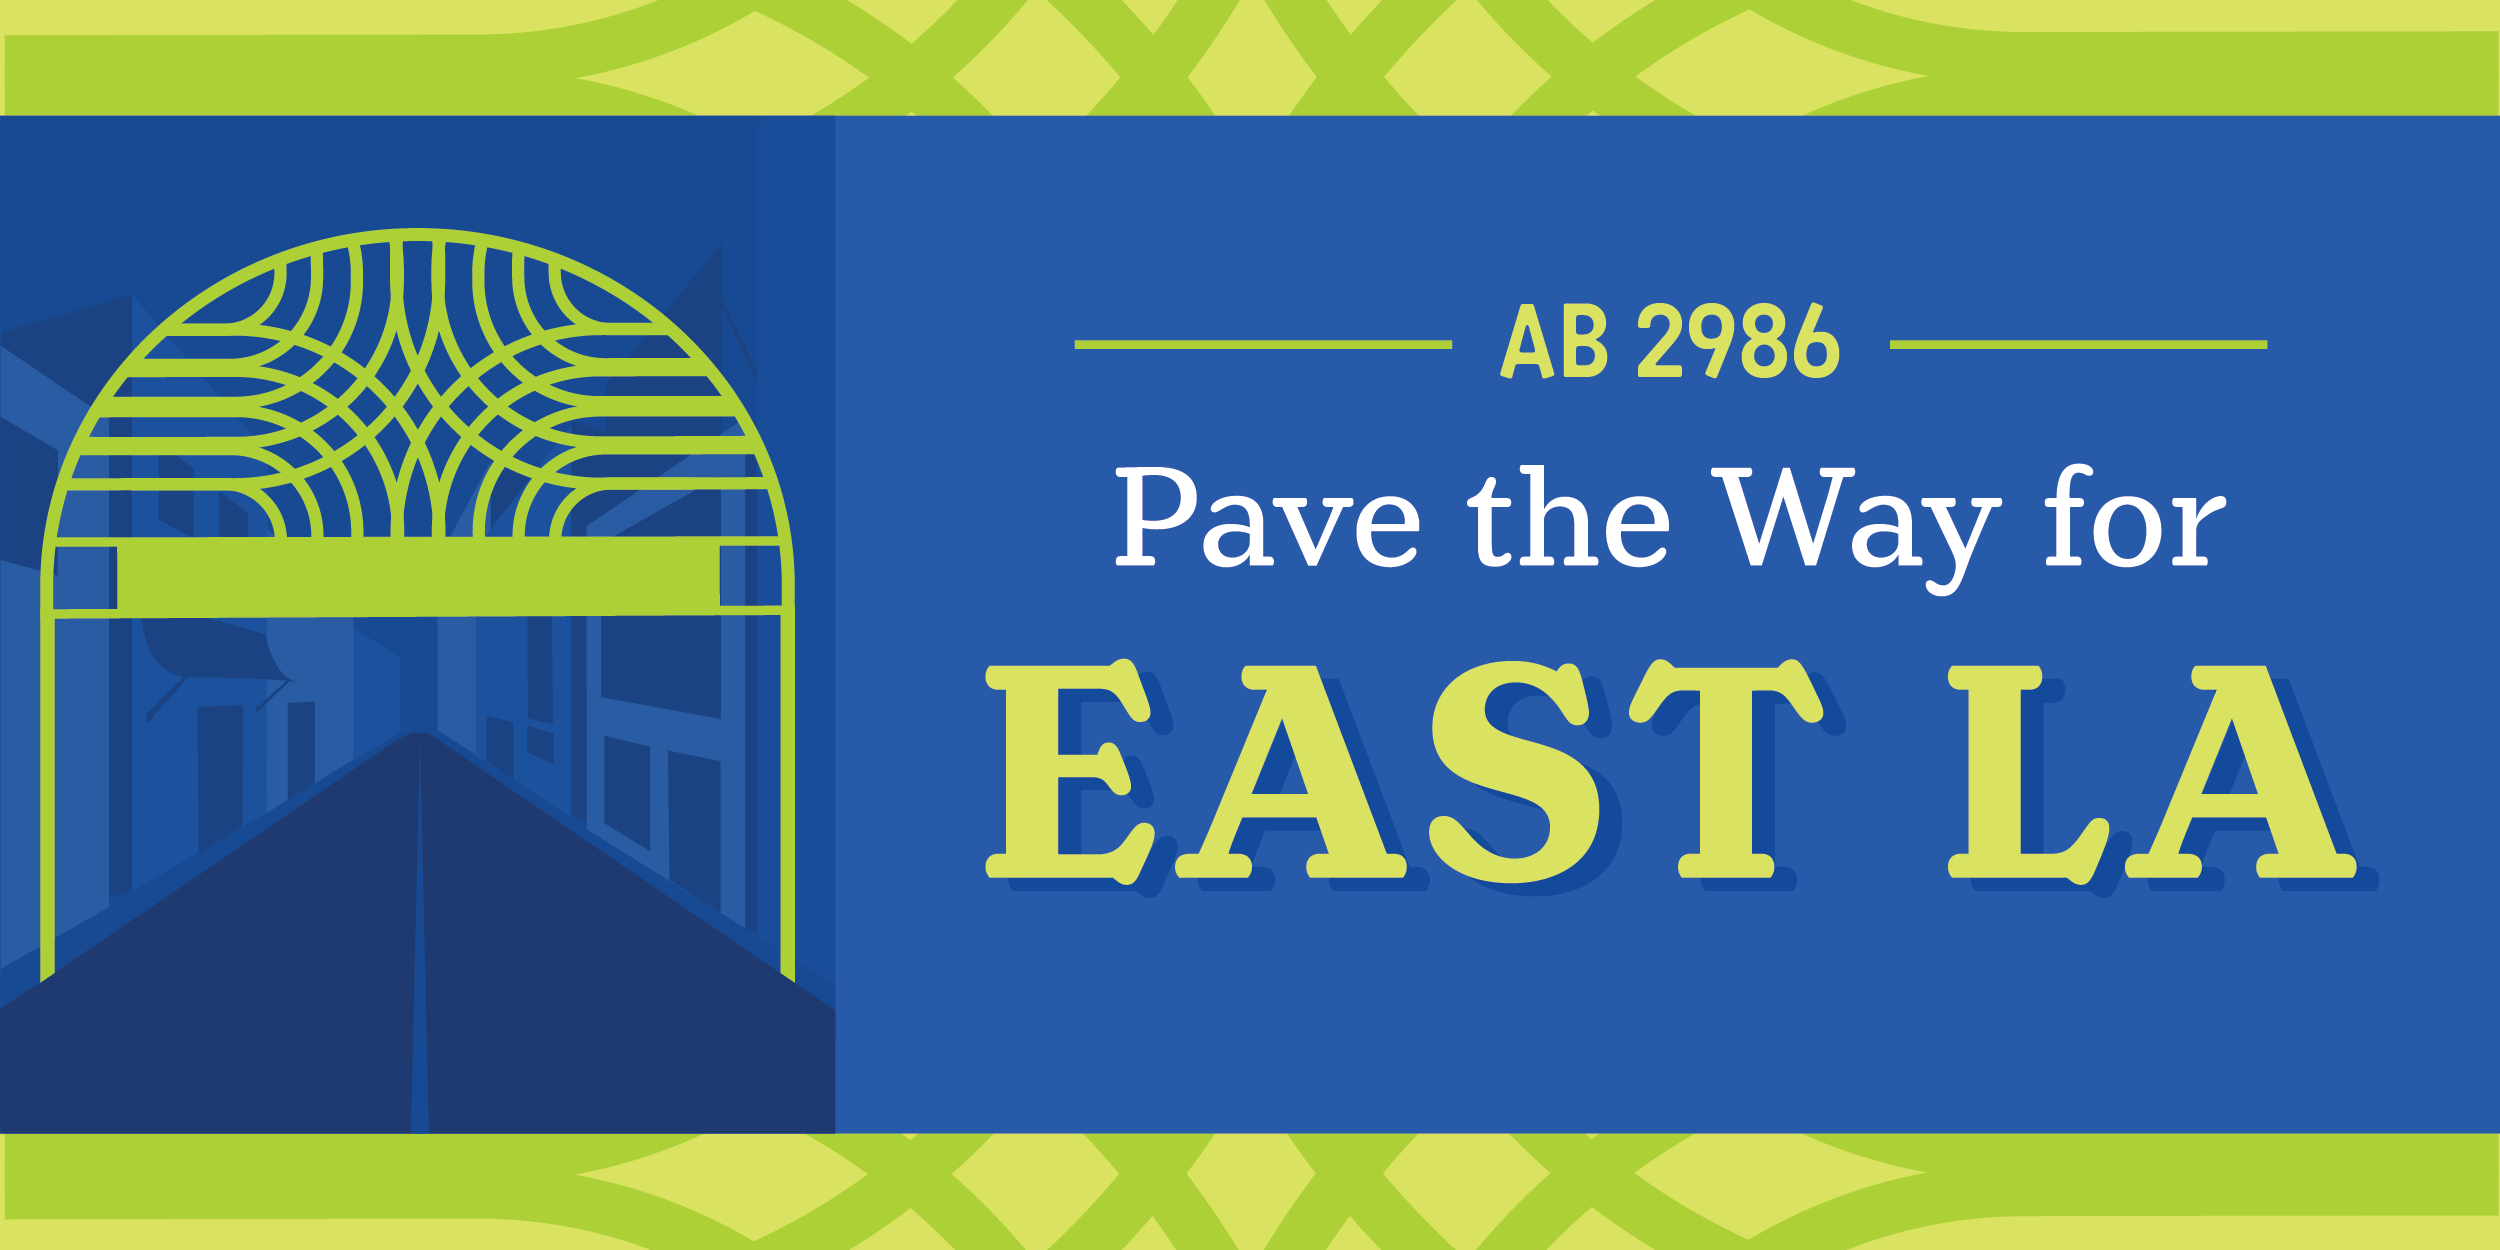 AB 2986 Pave the Way for East LA